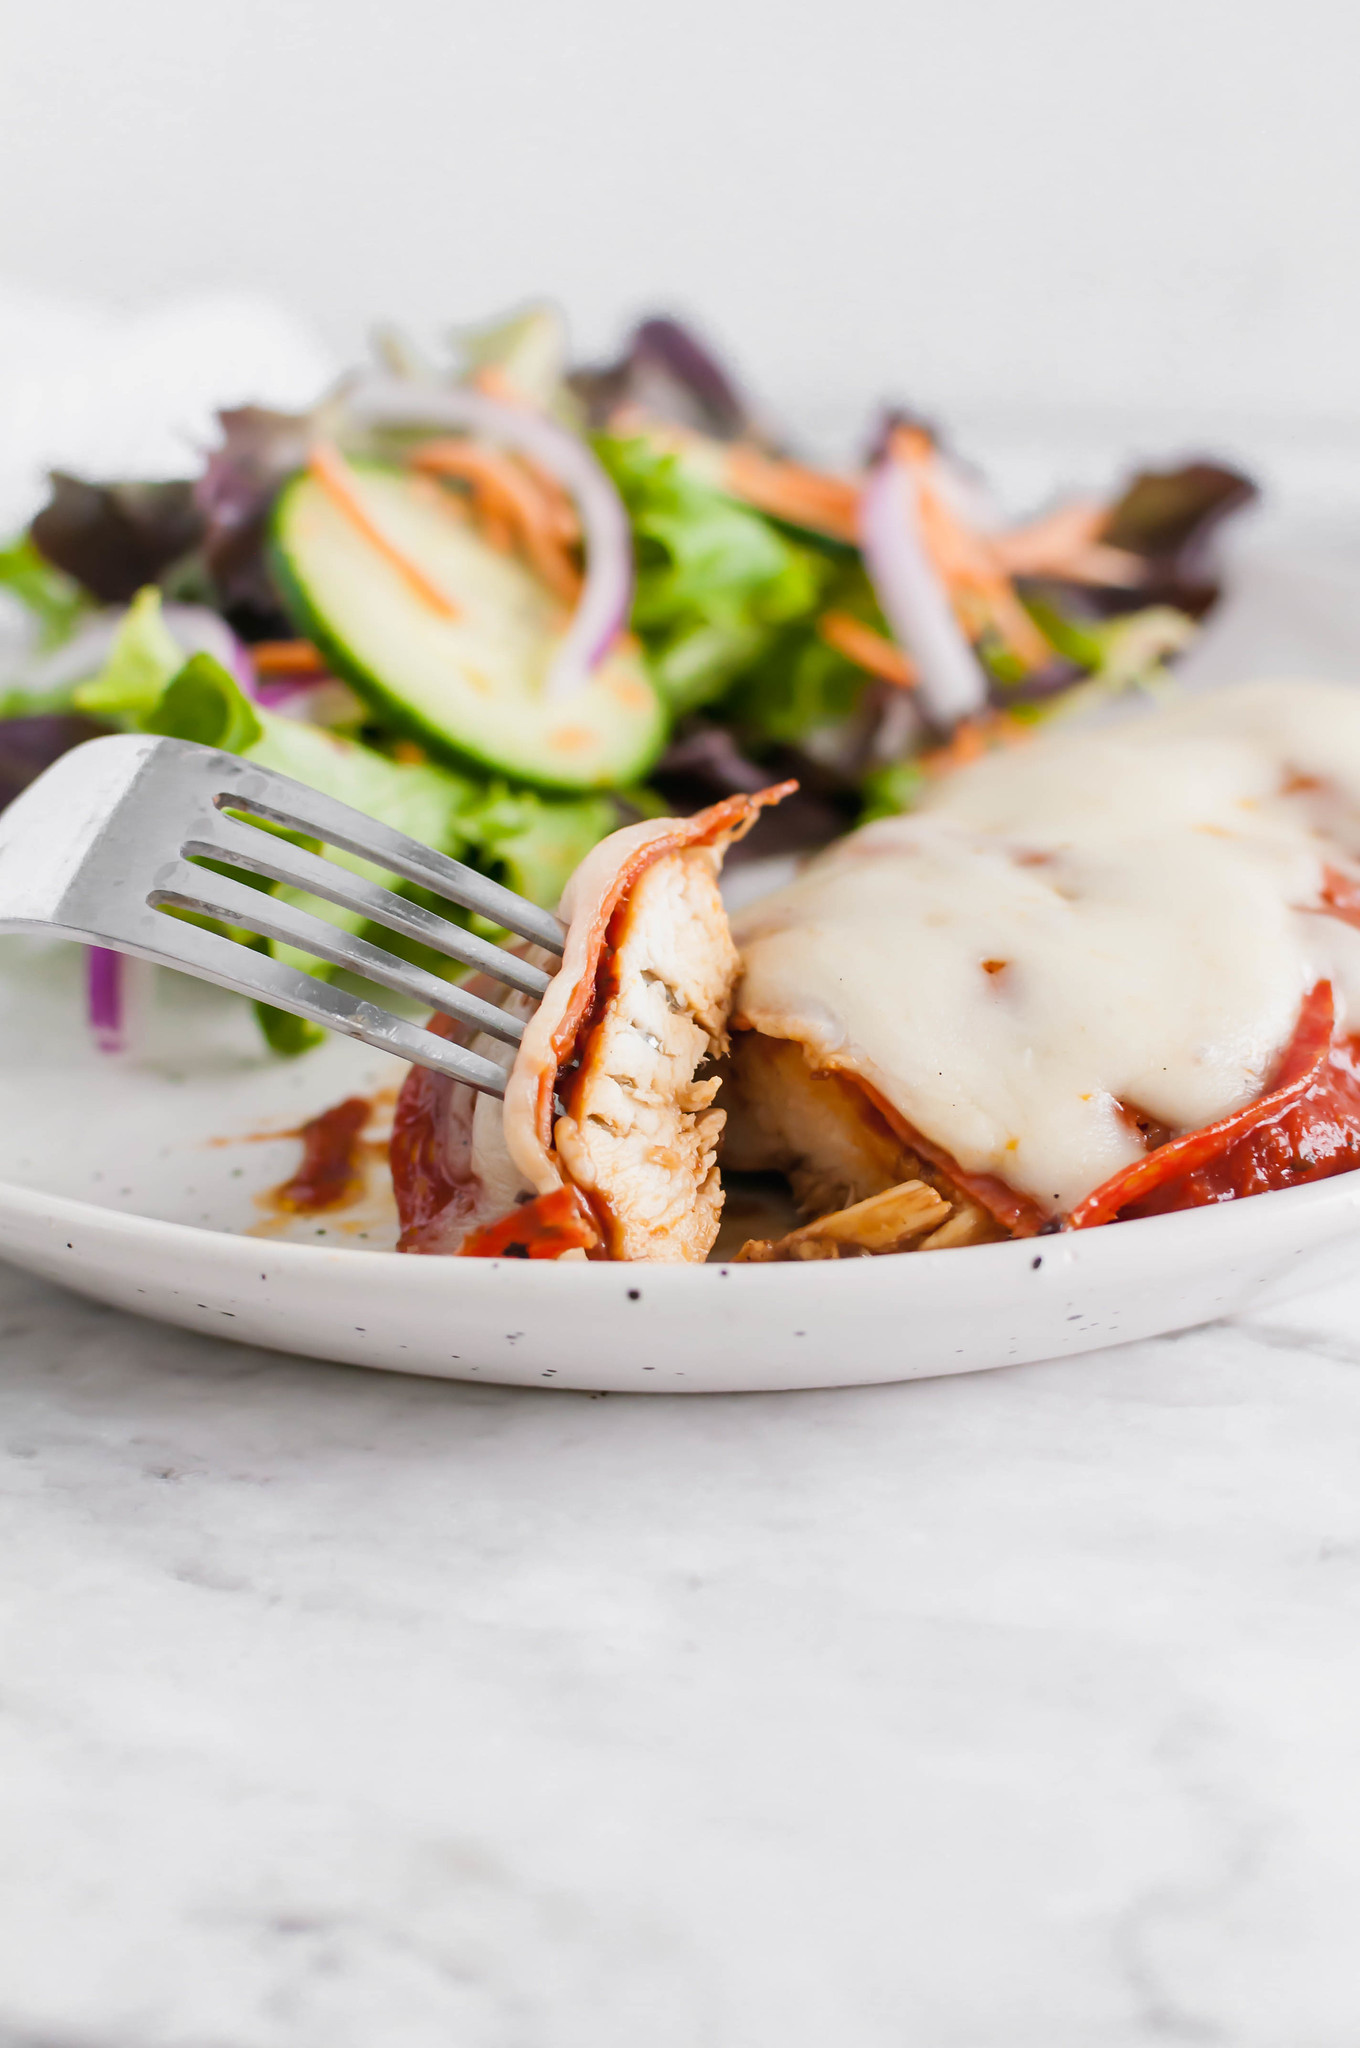 This Pizza Chicken is sure to be a new family favorite. Marinated chicken, grilled to perfection and topped with the best pizza toppings.